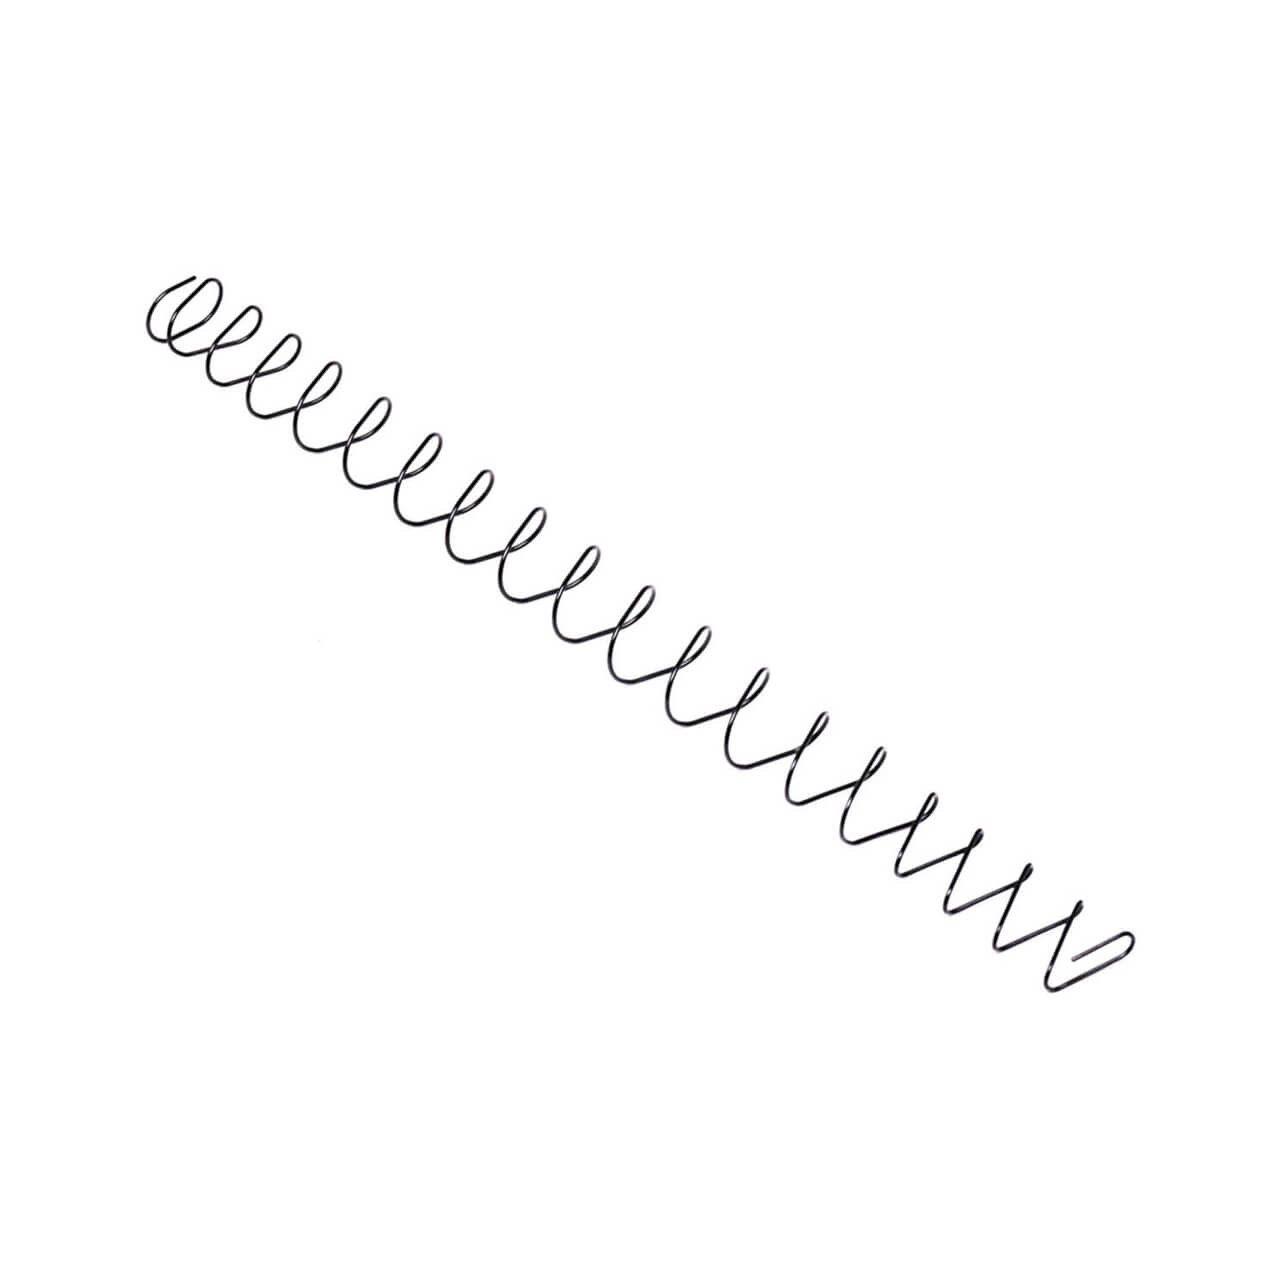 MagEx2 Replacement Follower Spring